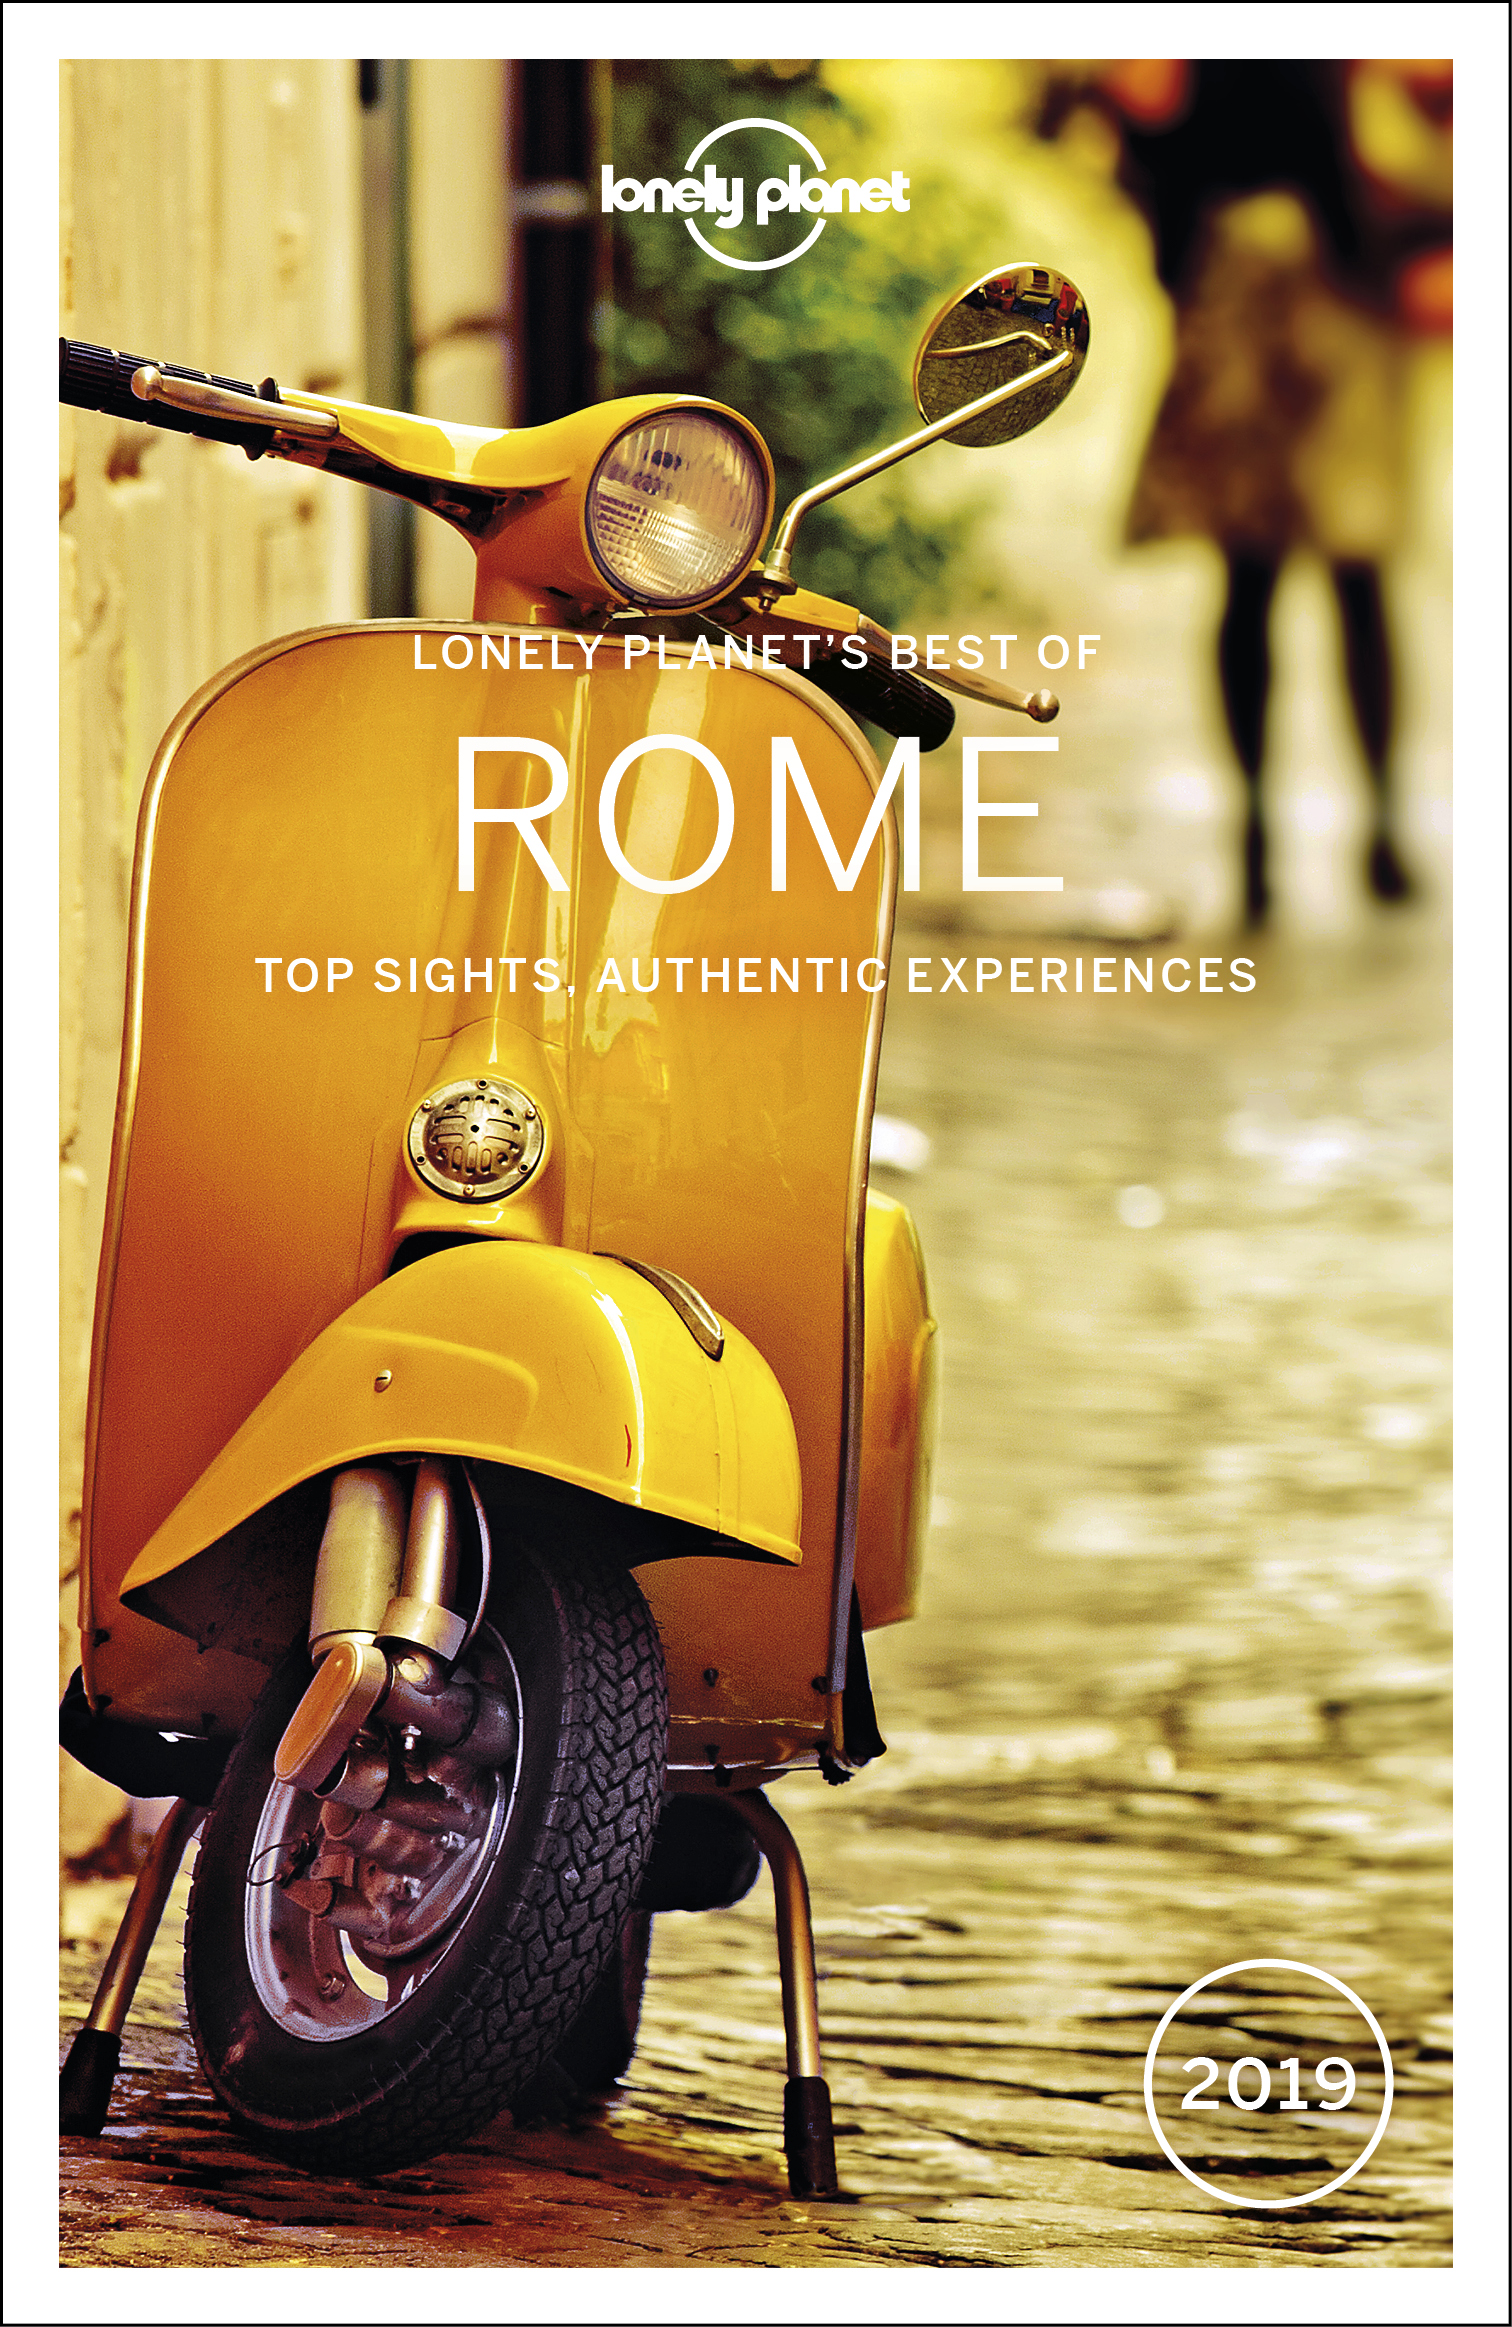 Of　Planet　by　Lonely　Planet's　Lonely　Best　Rome　(9781786571649)